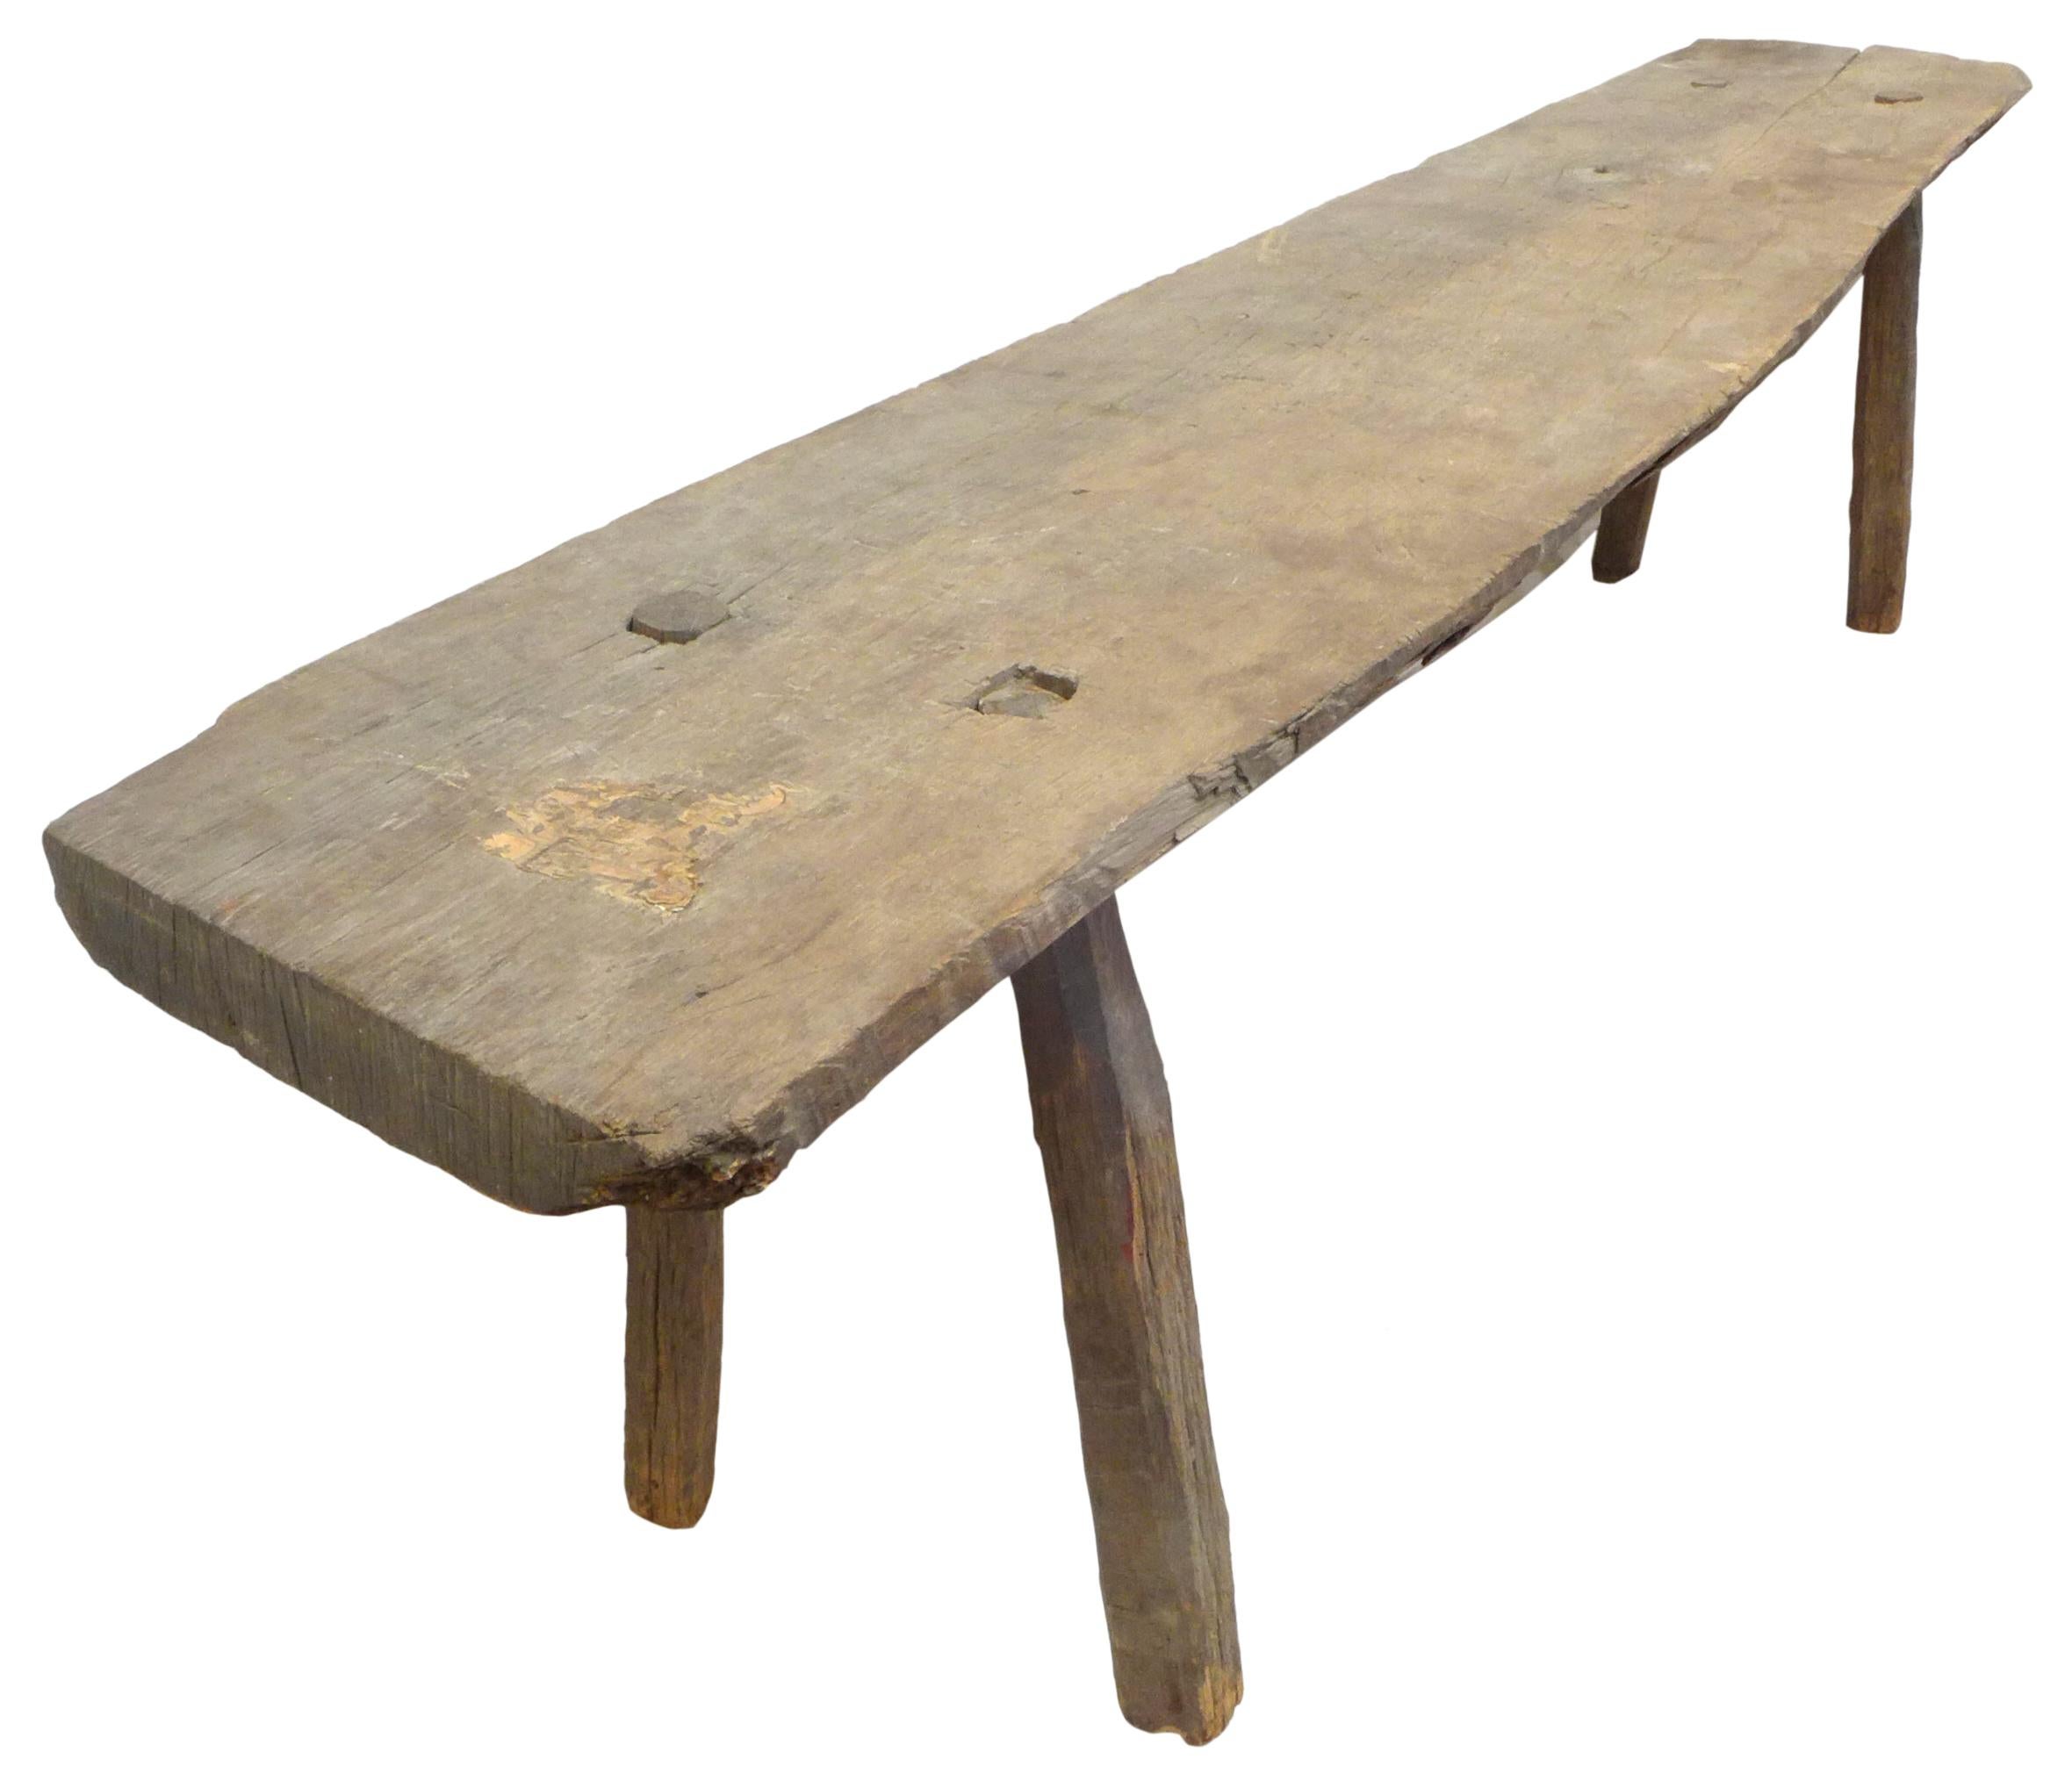 A fantastic rustic, hand-hewn wood low console table or bench. An austere, reduced form; a raw-edge wood plank with four cylindrical mortise and tenon legs. Wonderful surface and patina from age. Great, unusual scale. A powerful and evocative